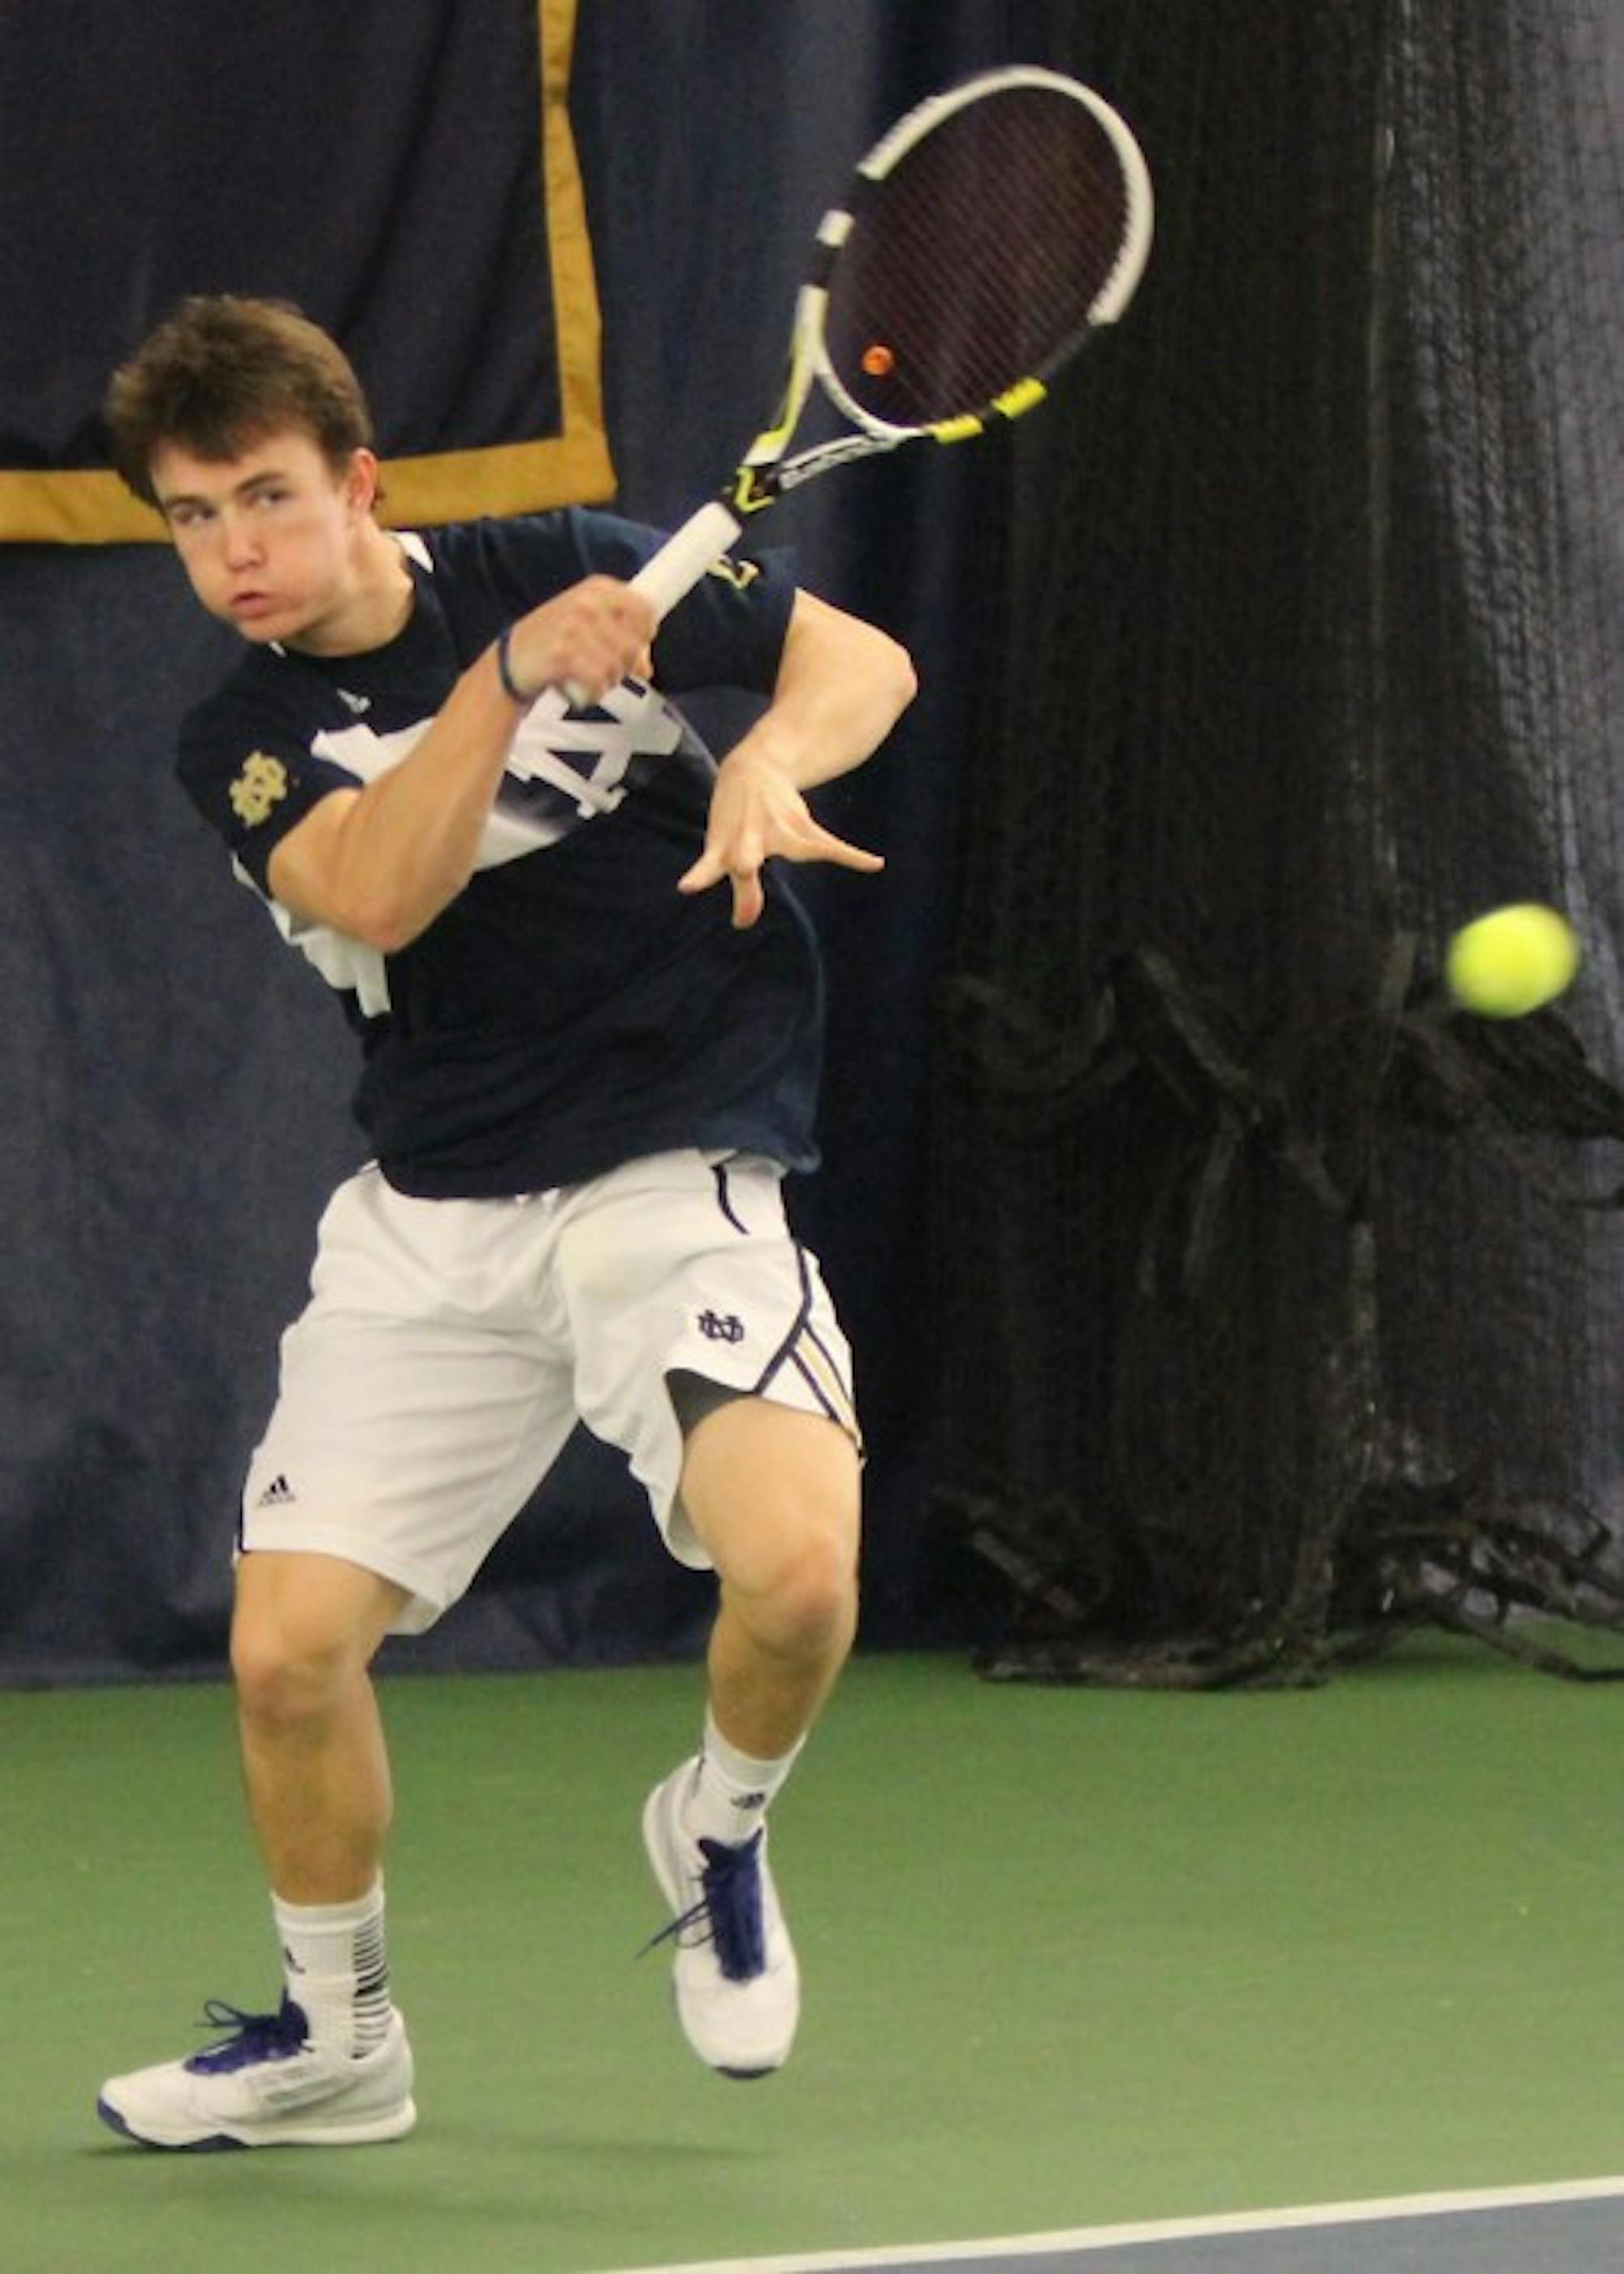 Irish senior Greg Andrews hits a shot during Notre Dame's 4-2 loss to Ohio State on Saturday in the Eck Tennis Center.